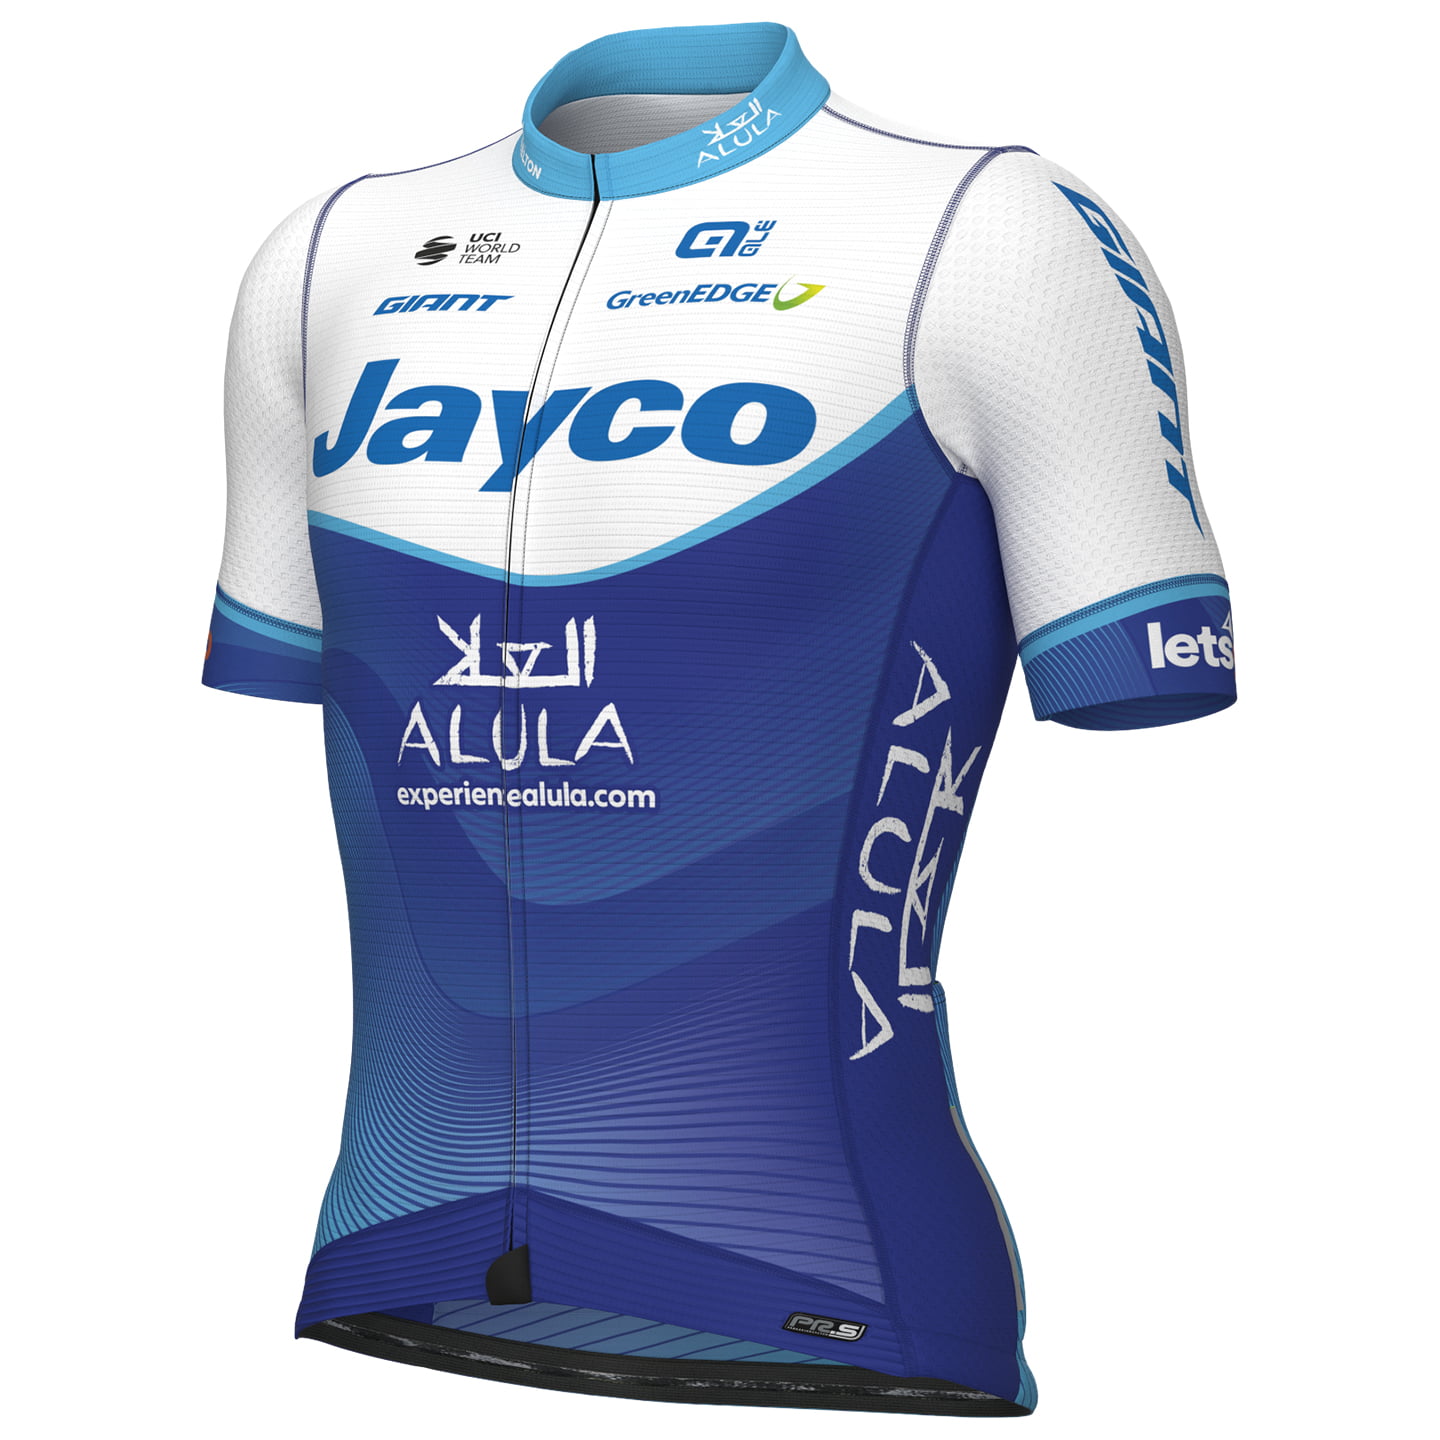 TEAM JAYCO-ALULA PR.S 2023 Short Sleeve Jersey, for men, size M, Cycle jersey, Cycling clothing